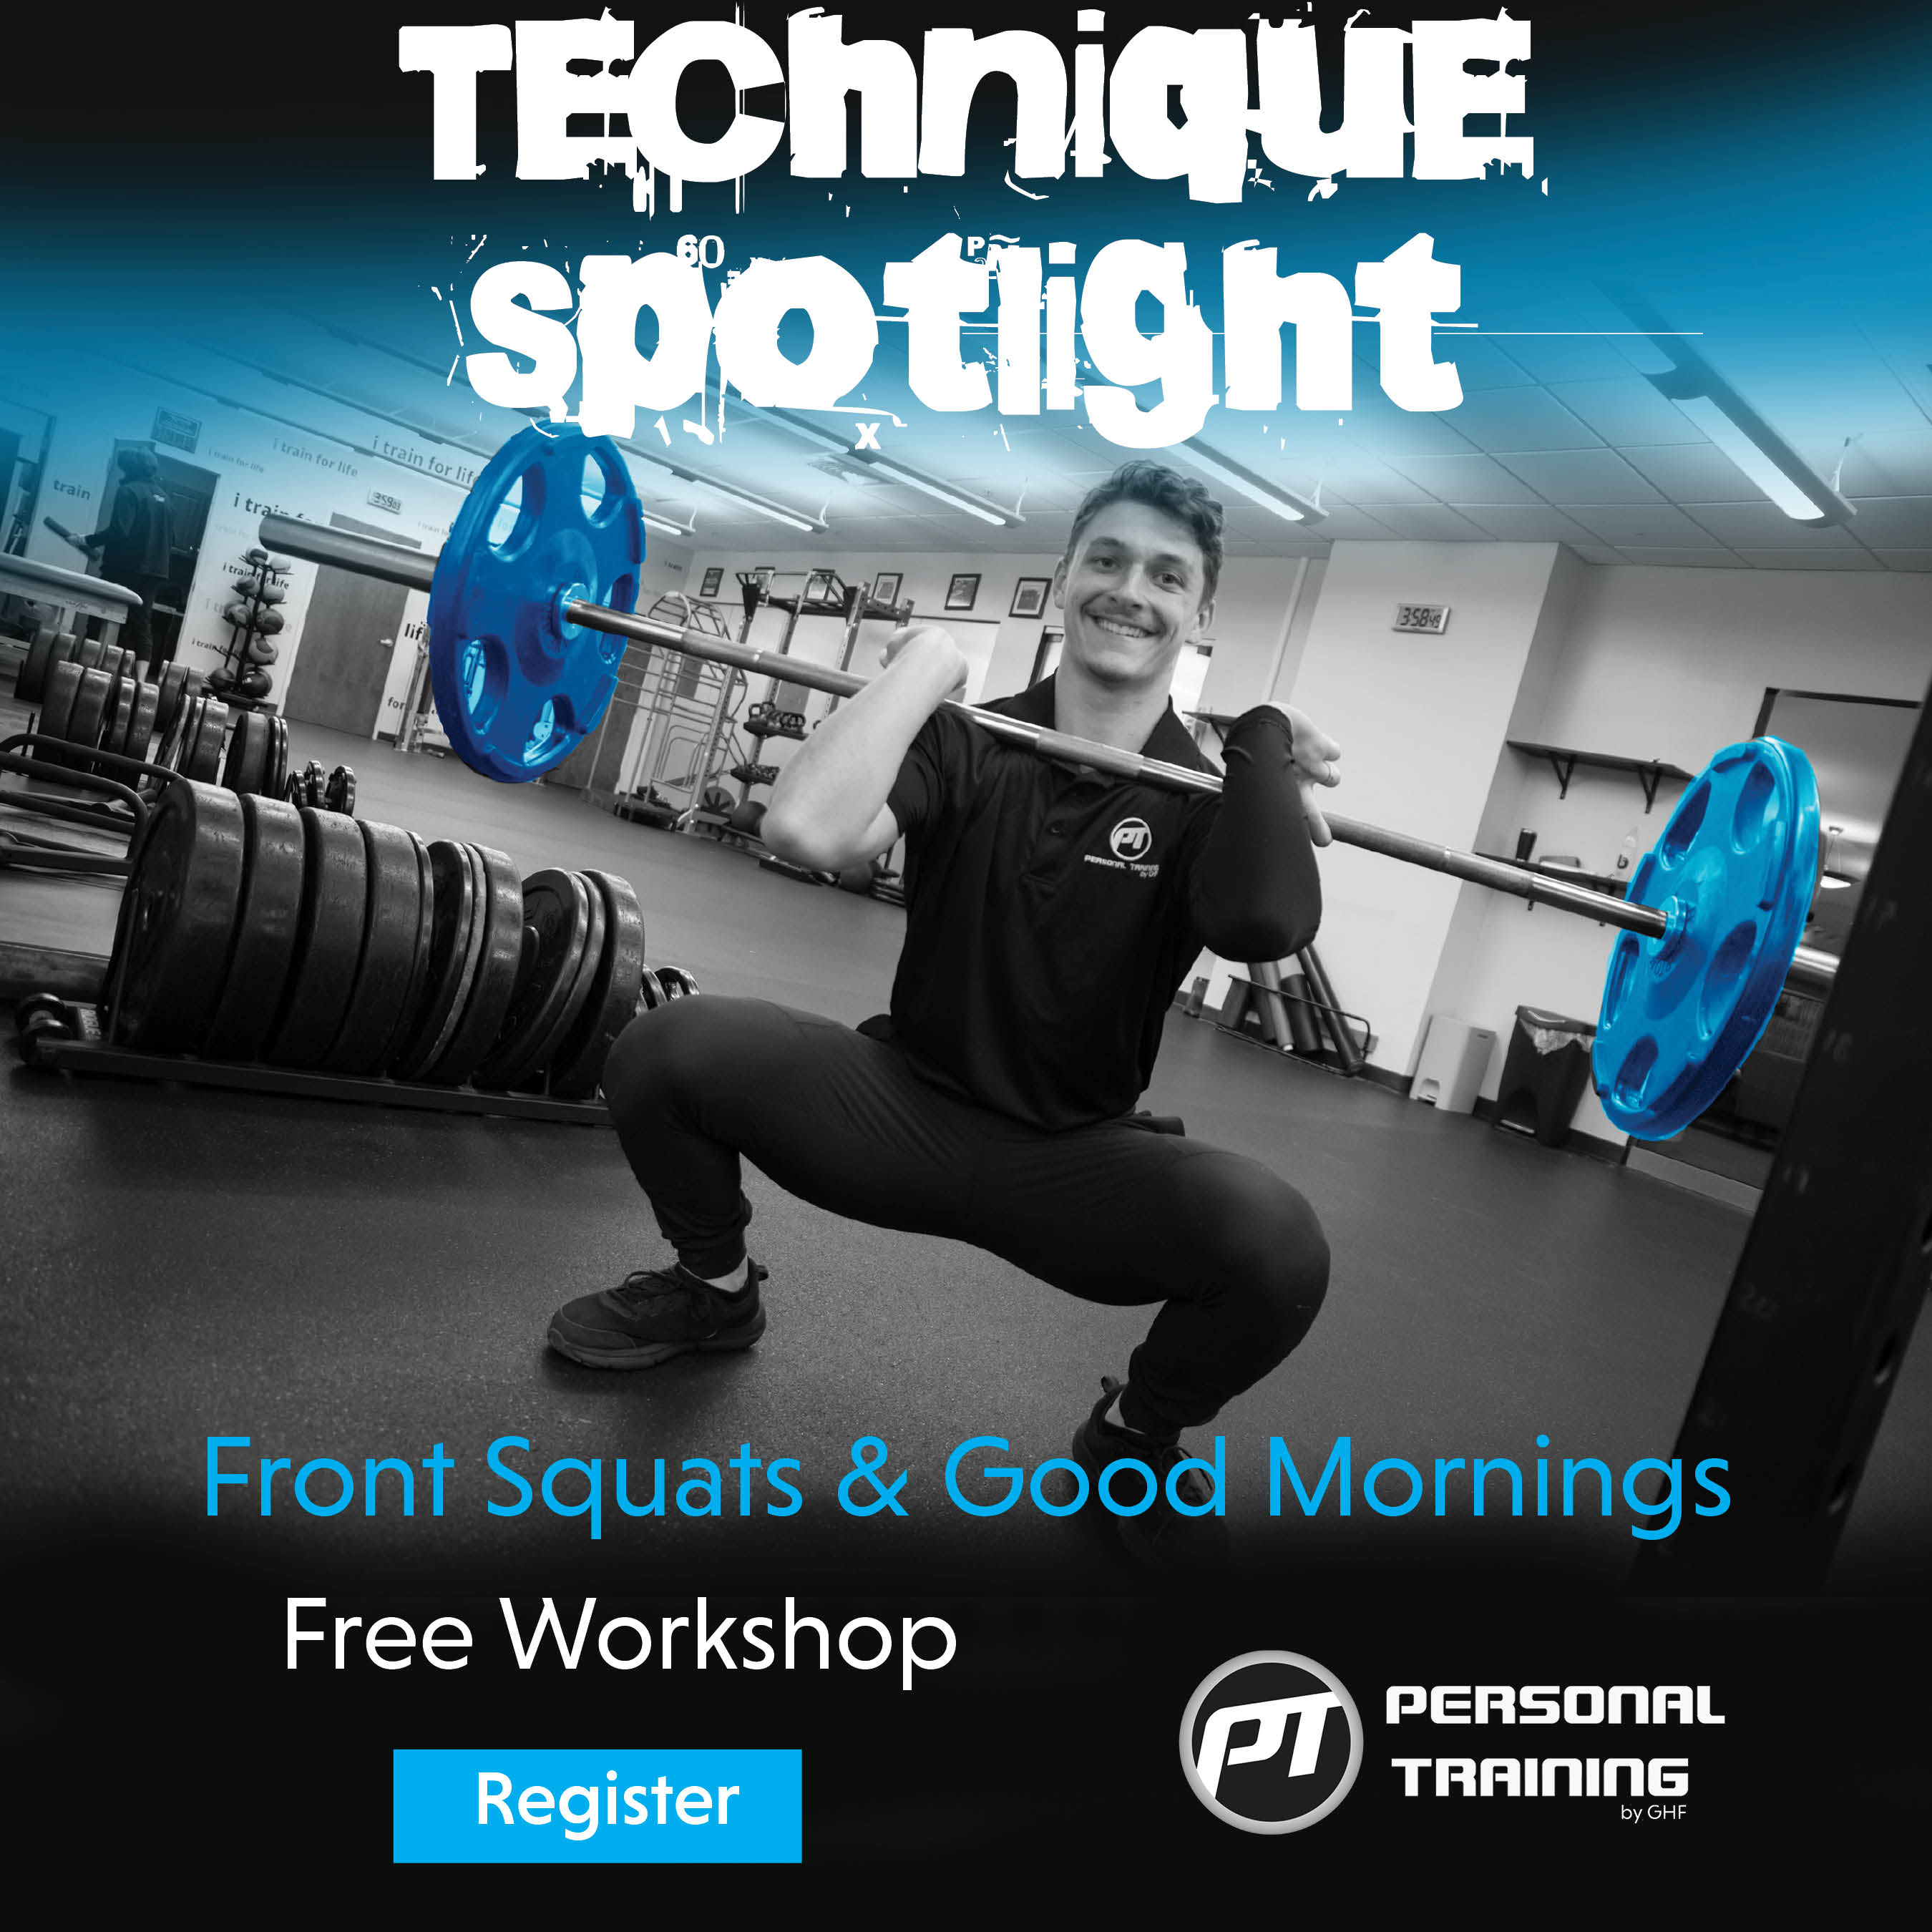 personal trainer workshops on front squats and good morning exercises